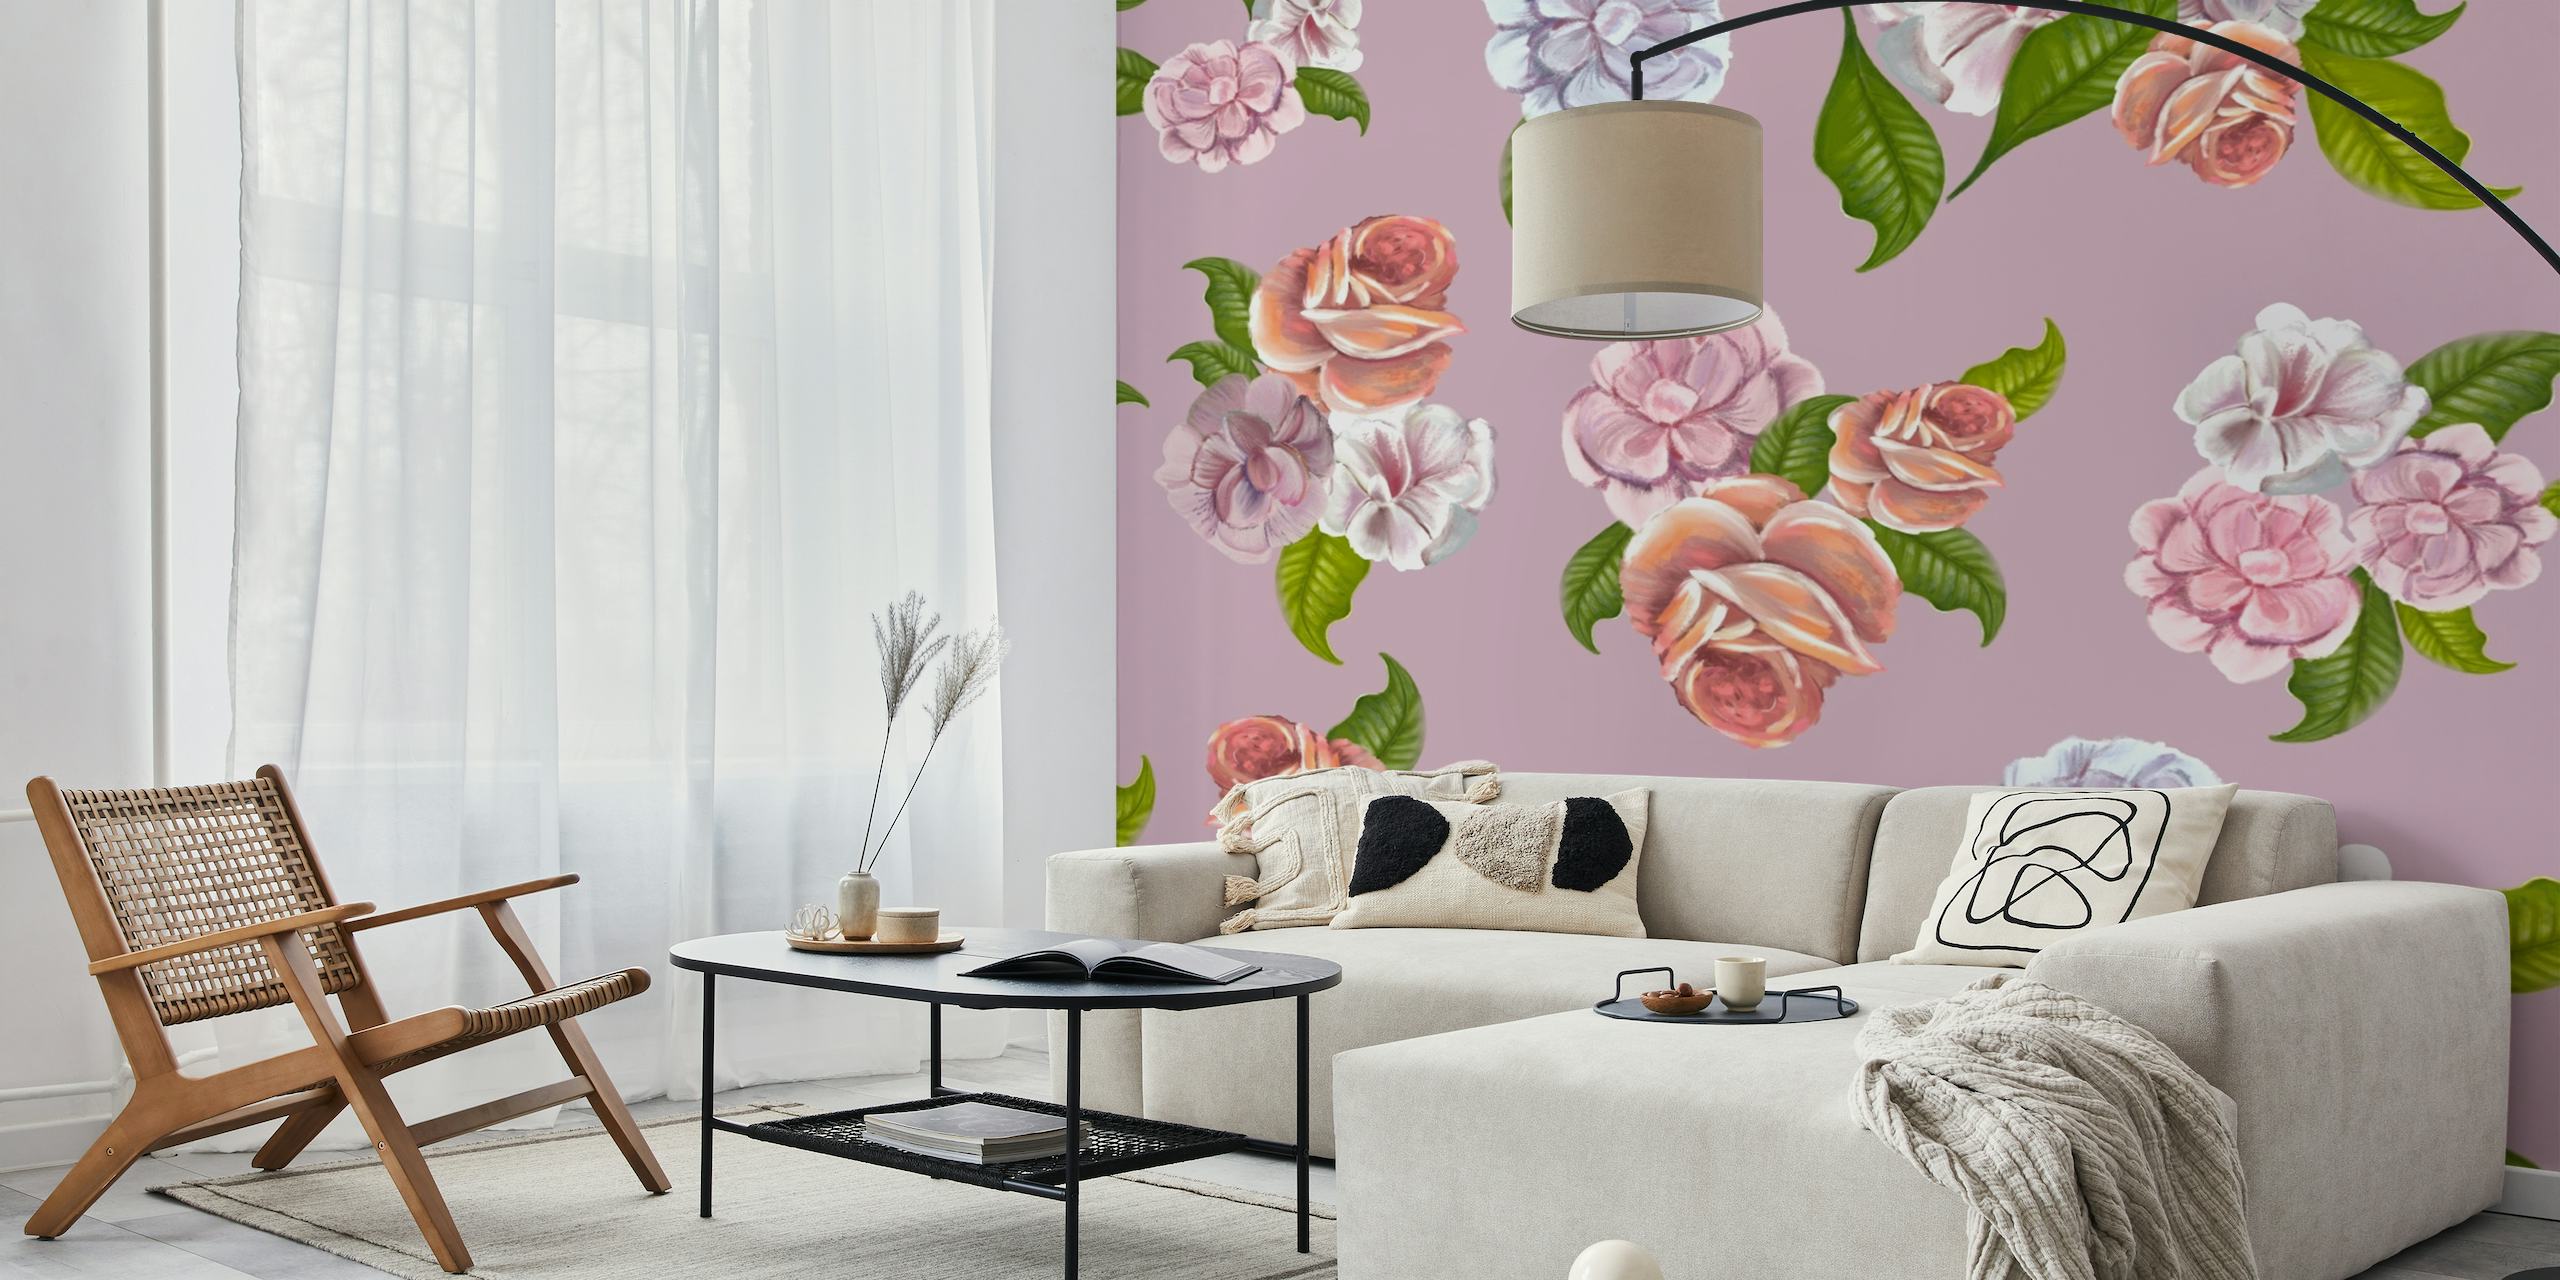 Heirloom floral wall ταπετσαρία